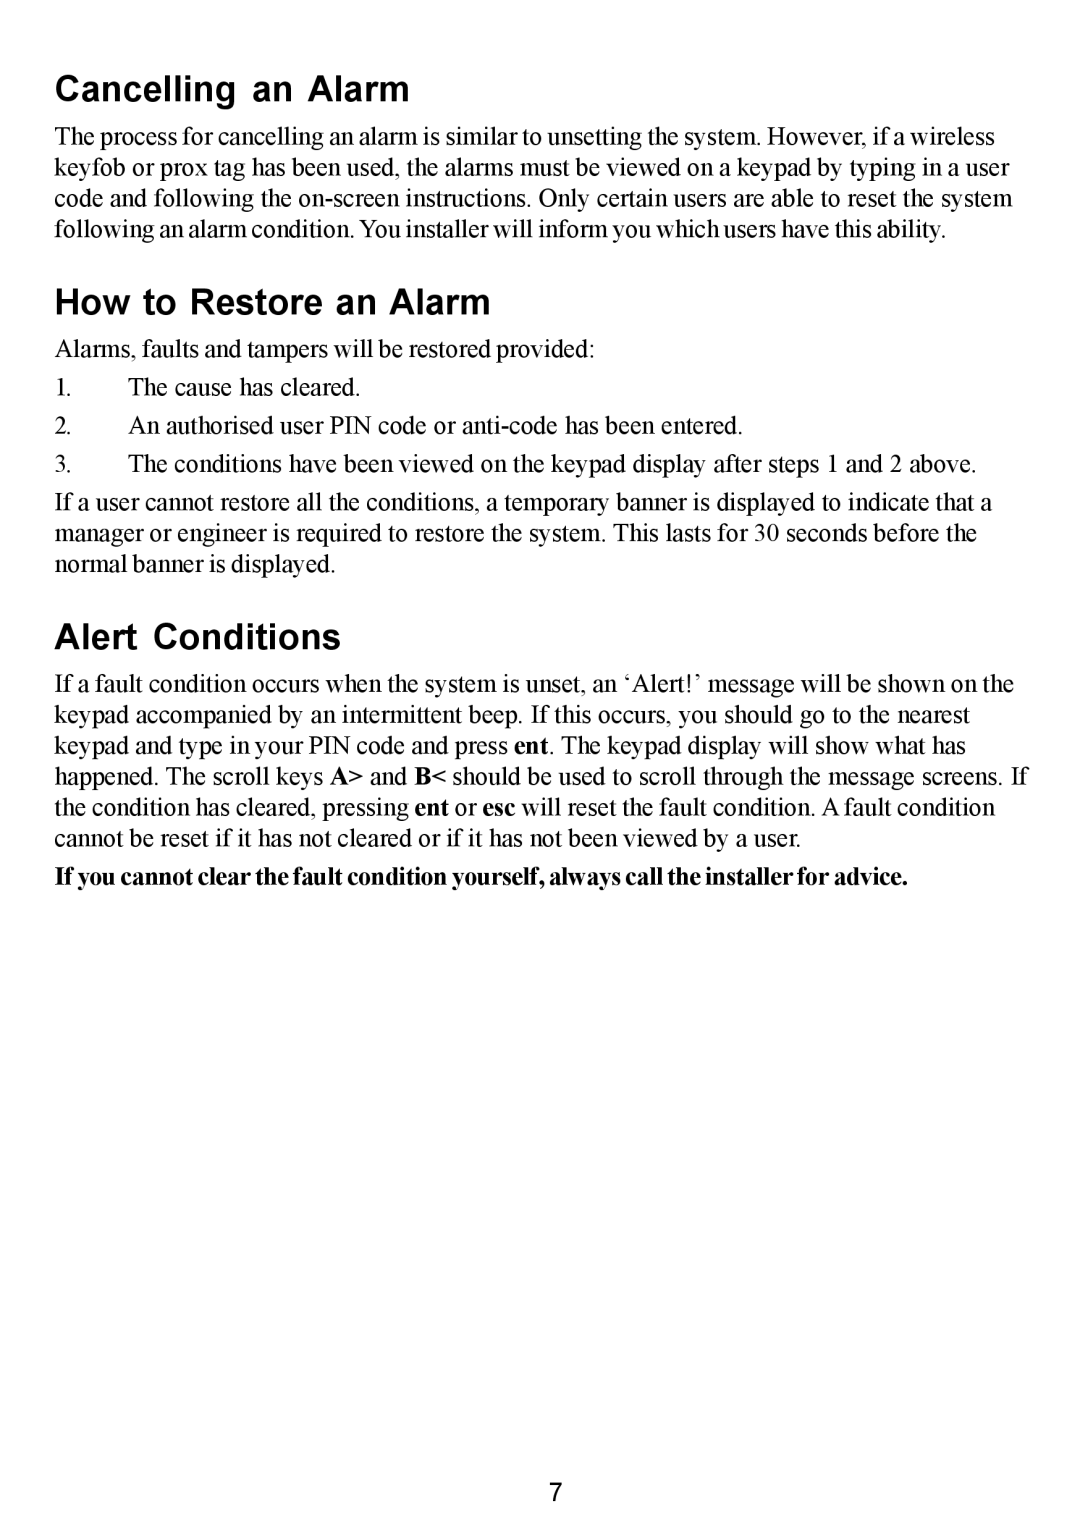 Honeywell Galaxy 2 manual Cancelling an Alarm, How to Restore an Alarm, Alert Conditions 